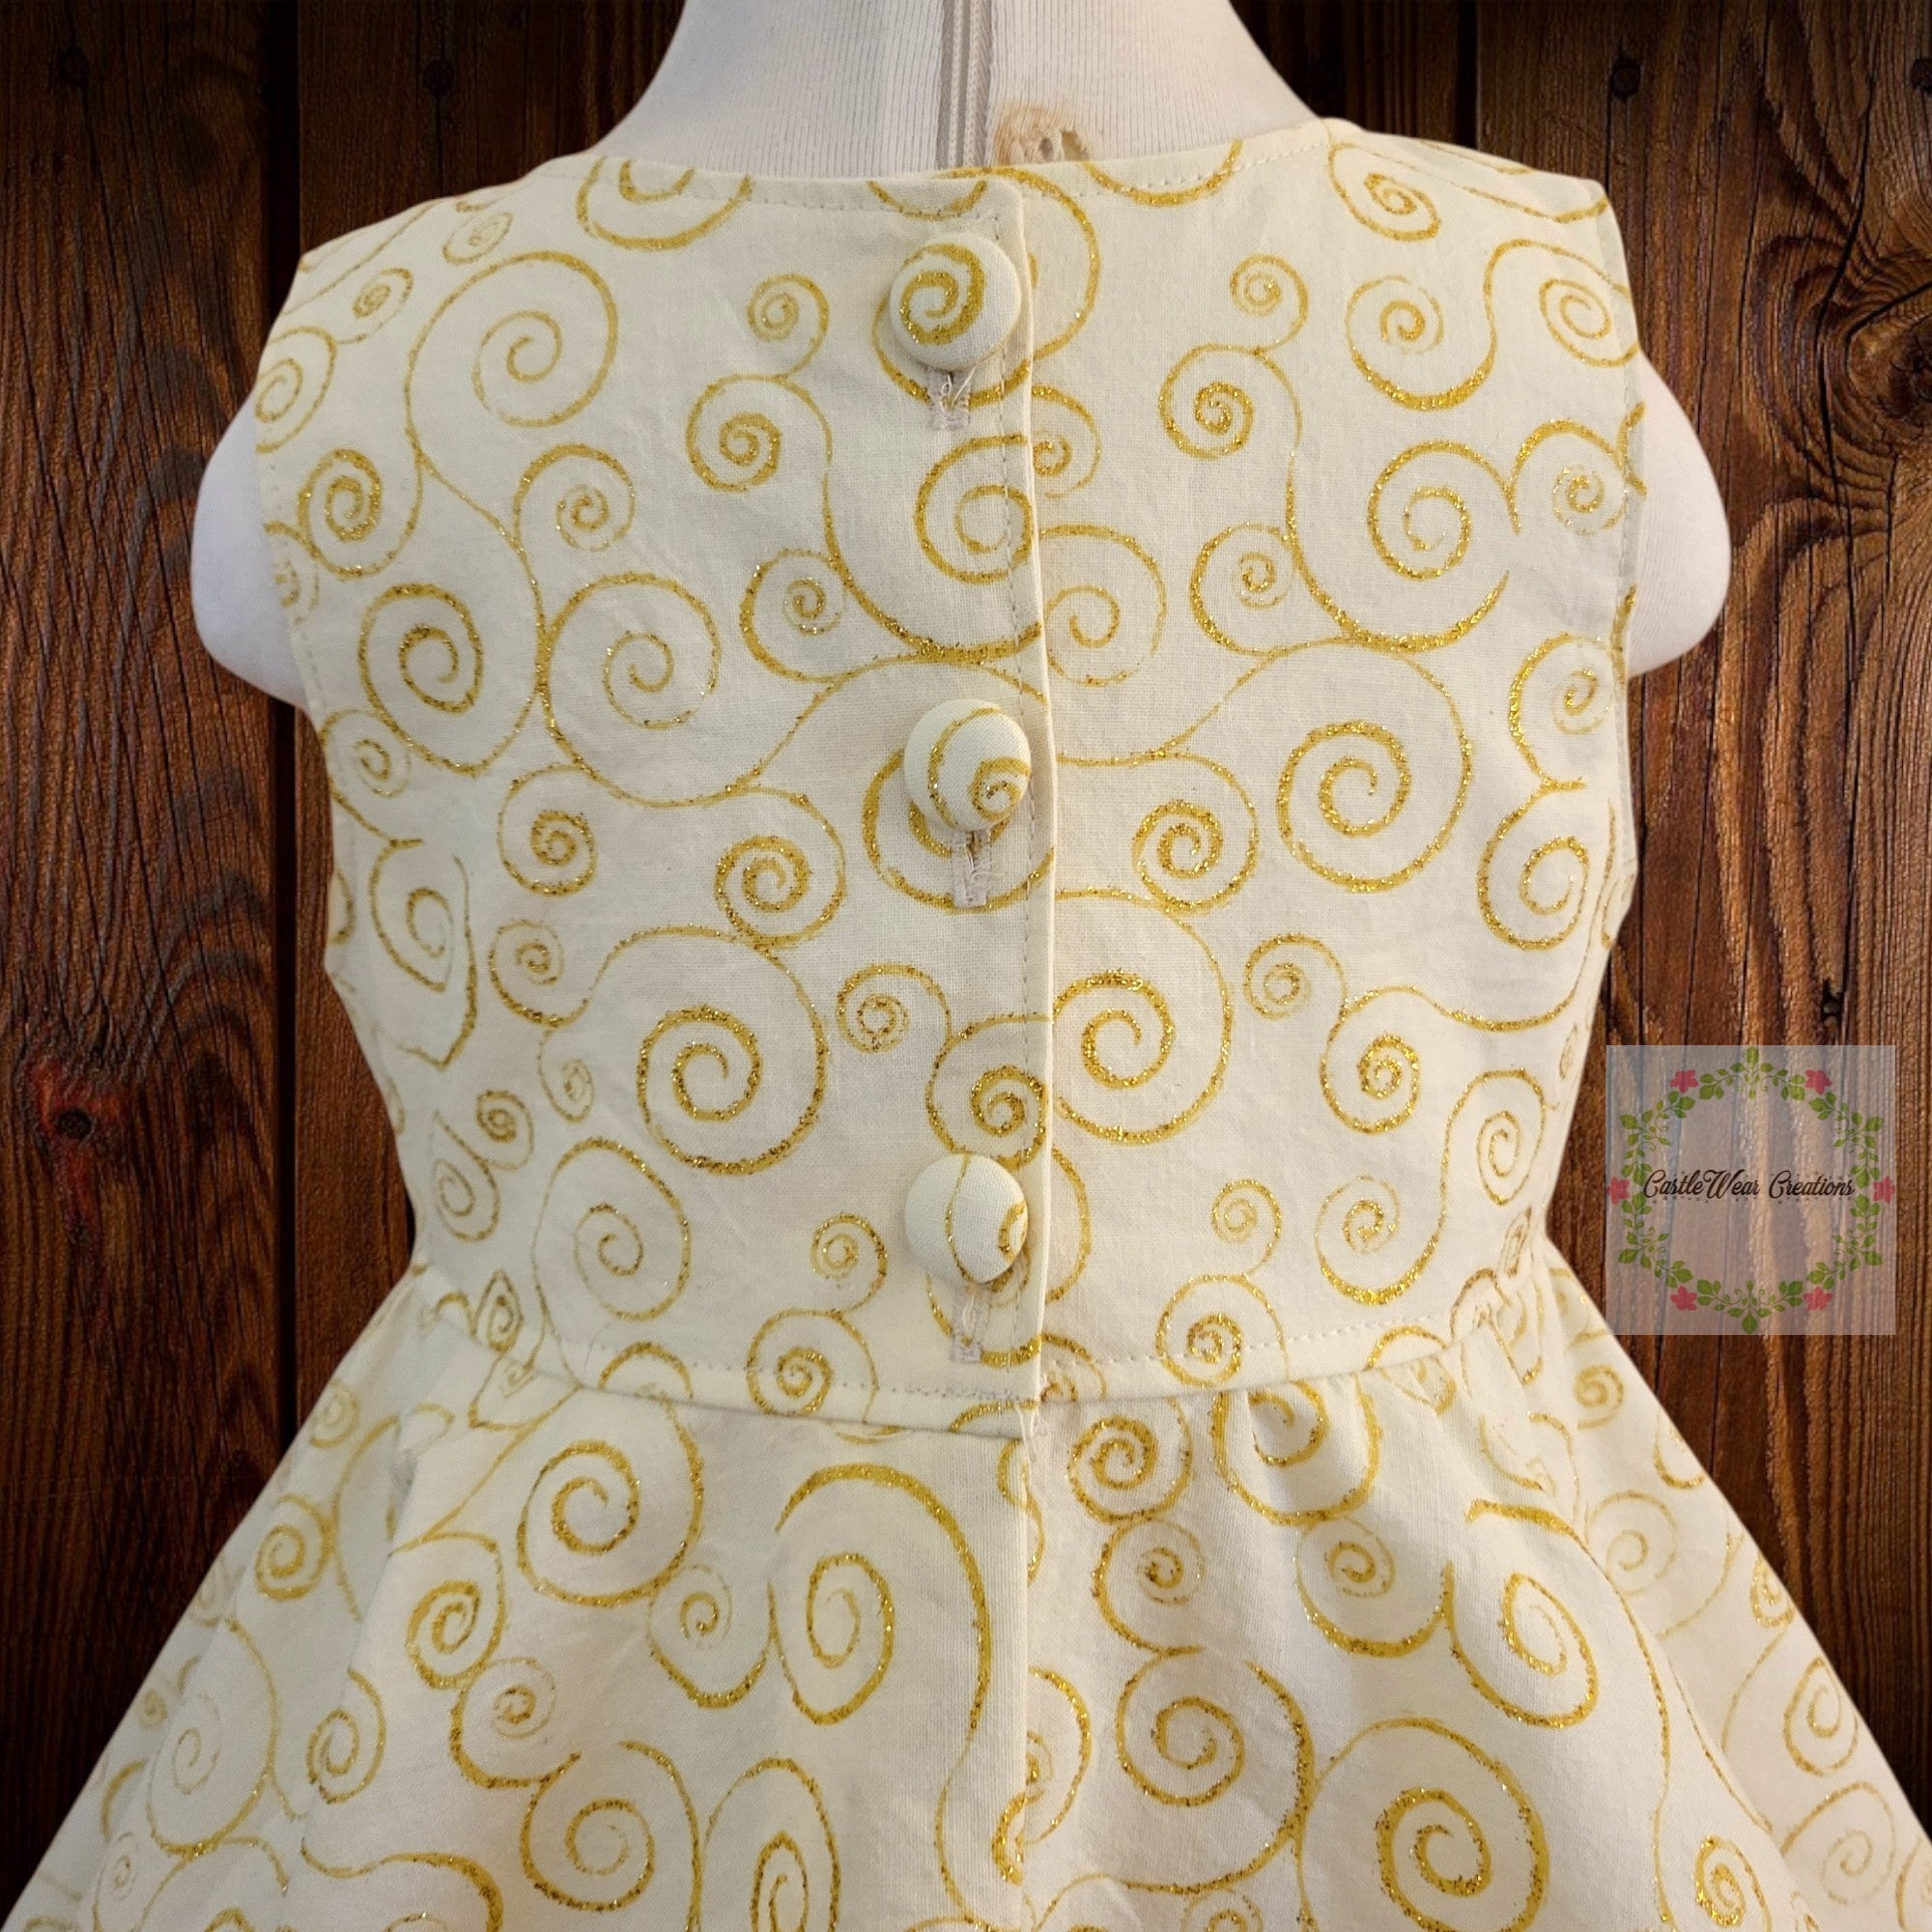 1950's Style Party Dress